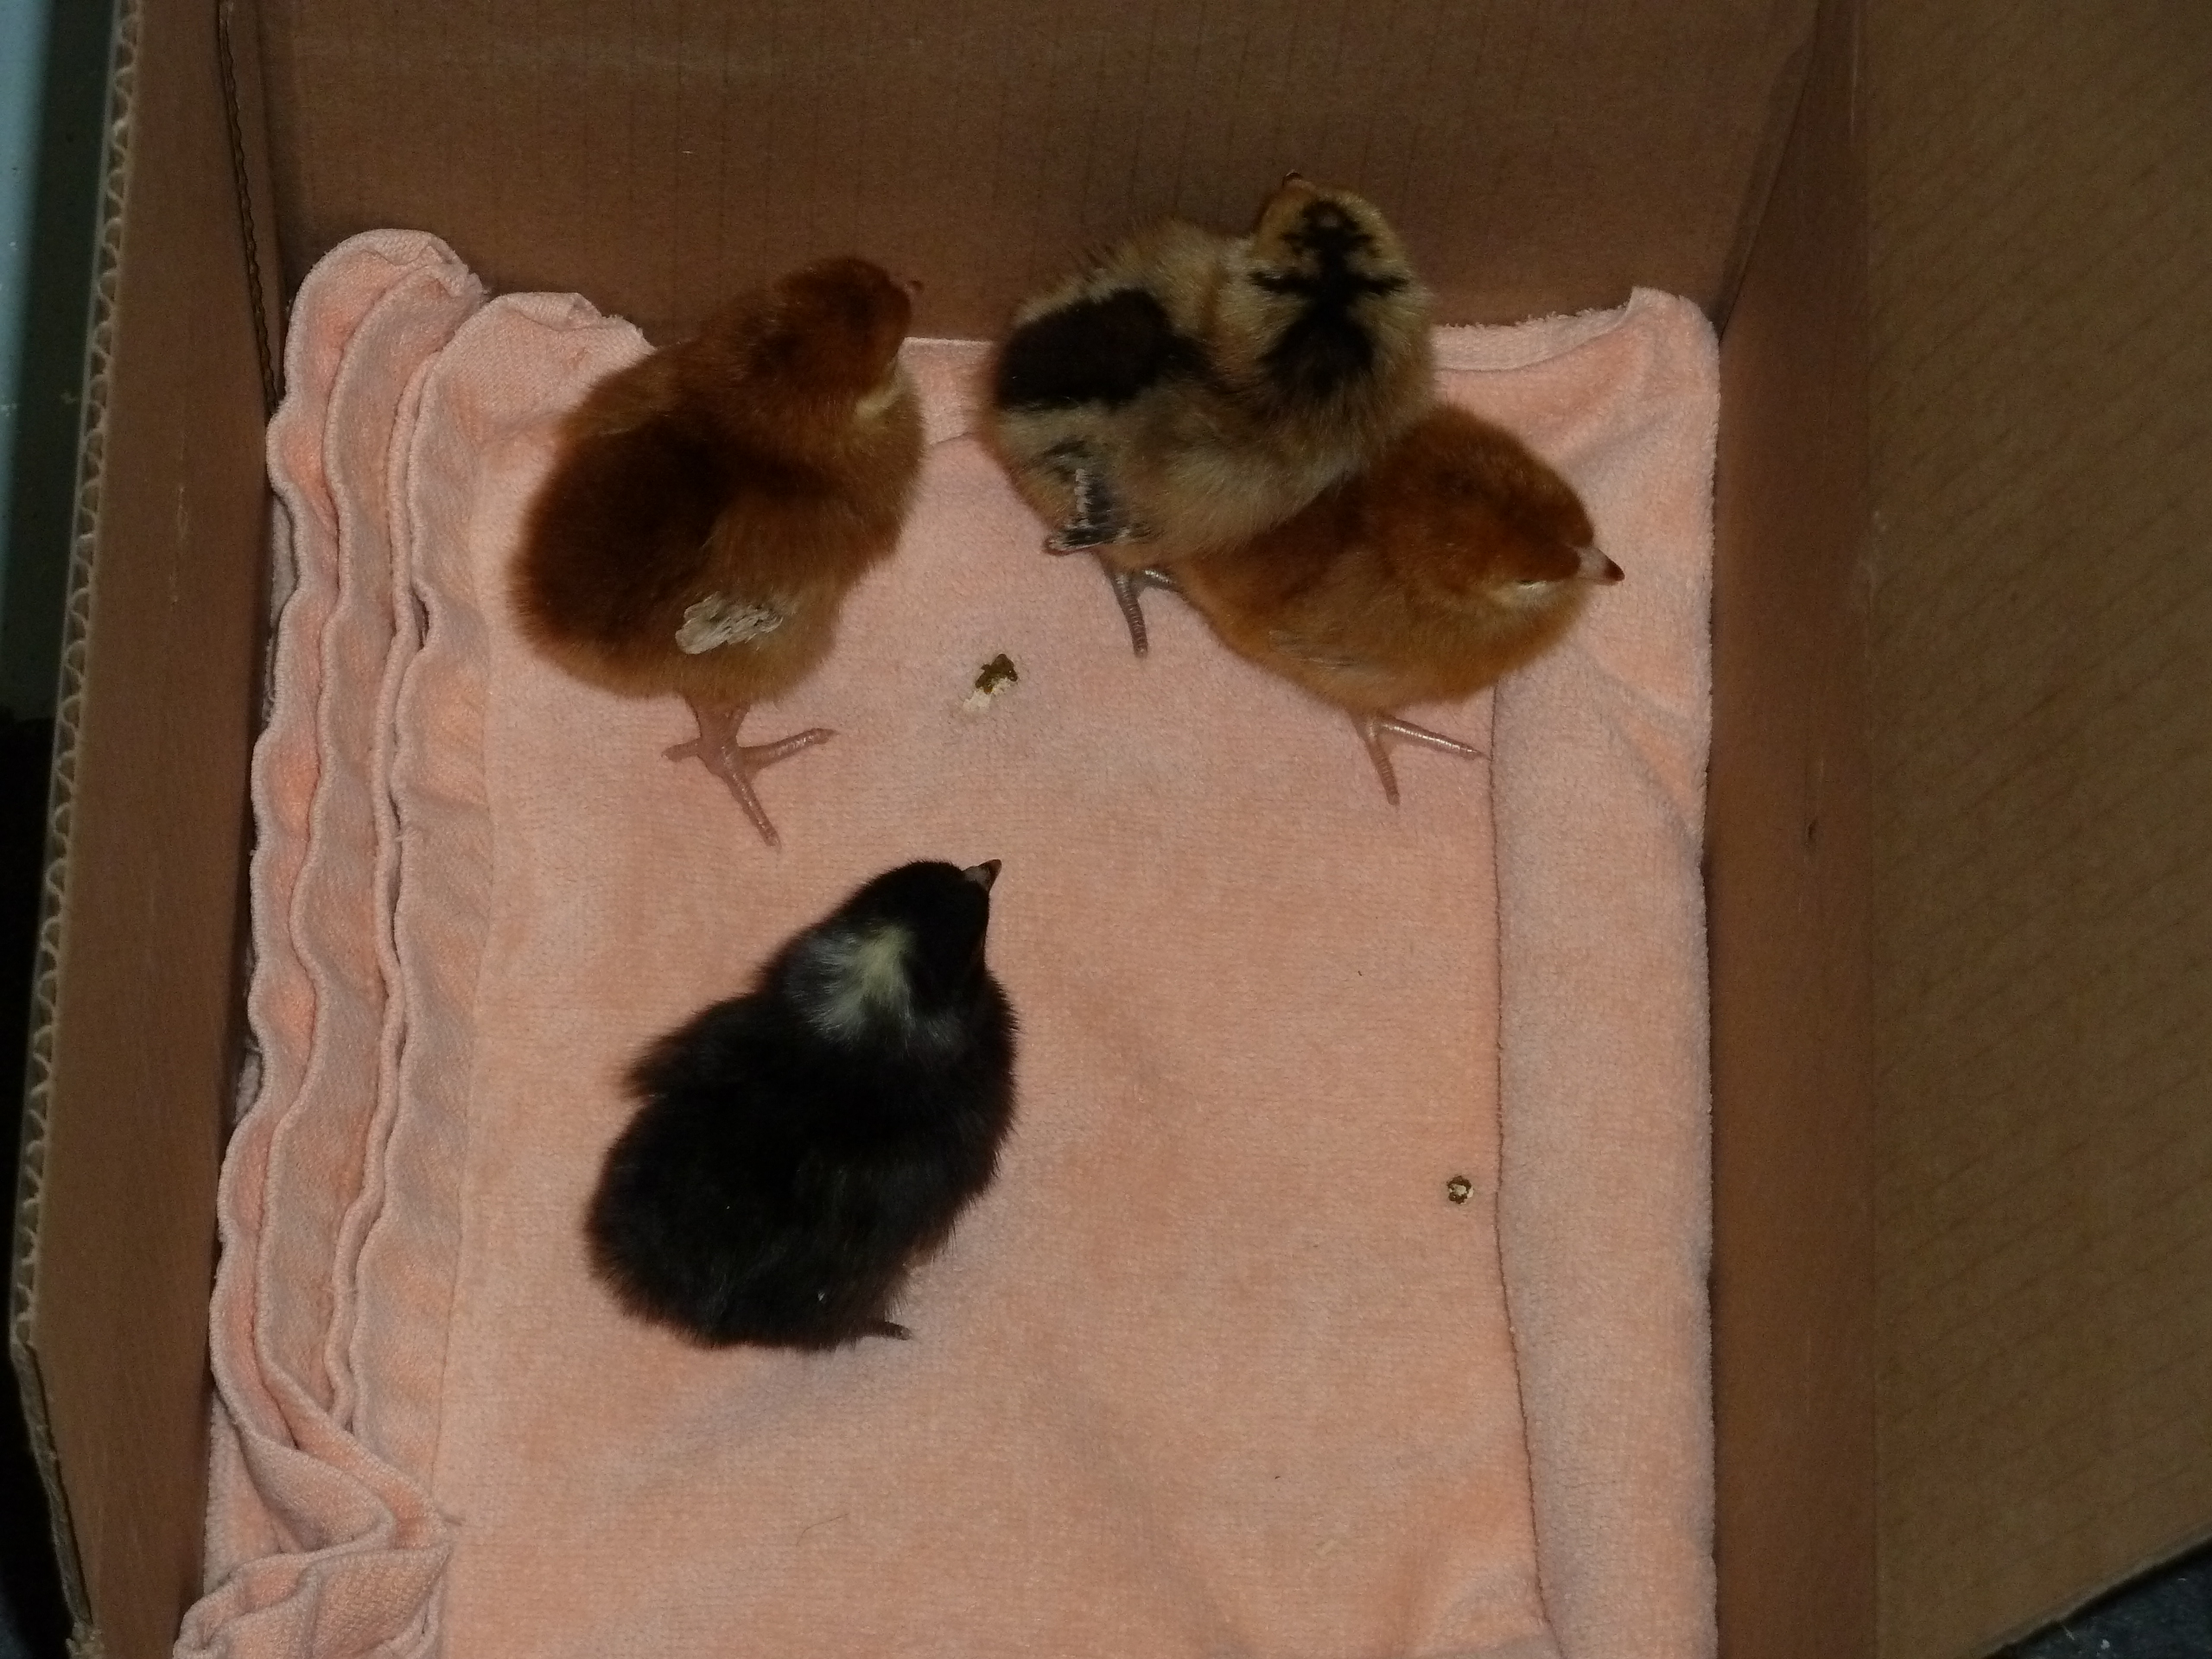 My first four chicks: two Rhode Islands Reds, 1 black Australorp, and 1 Americauna.  Two days later I went back to the local feed store and added a Buff Orpington and a Barred Plymouth Rock.  They all get along great together.